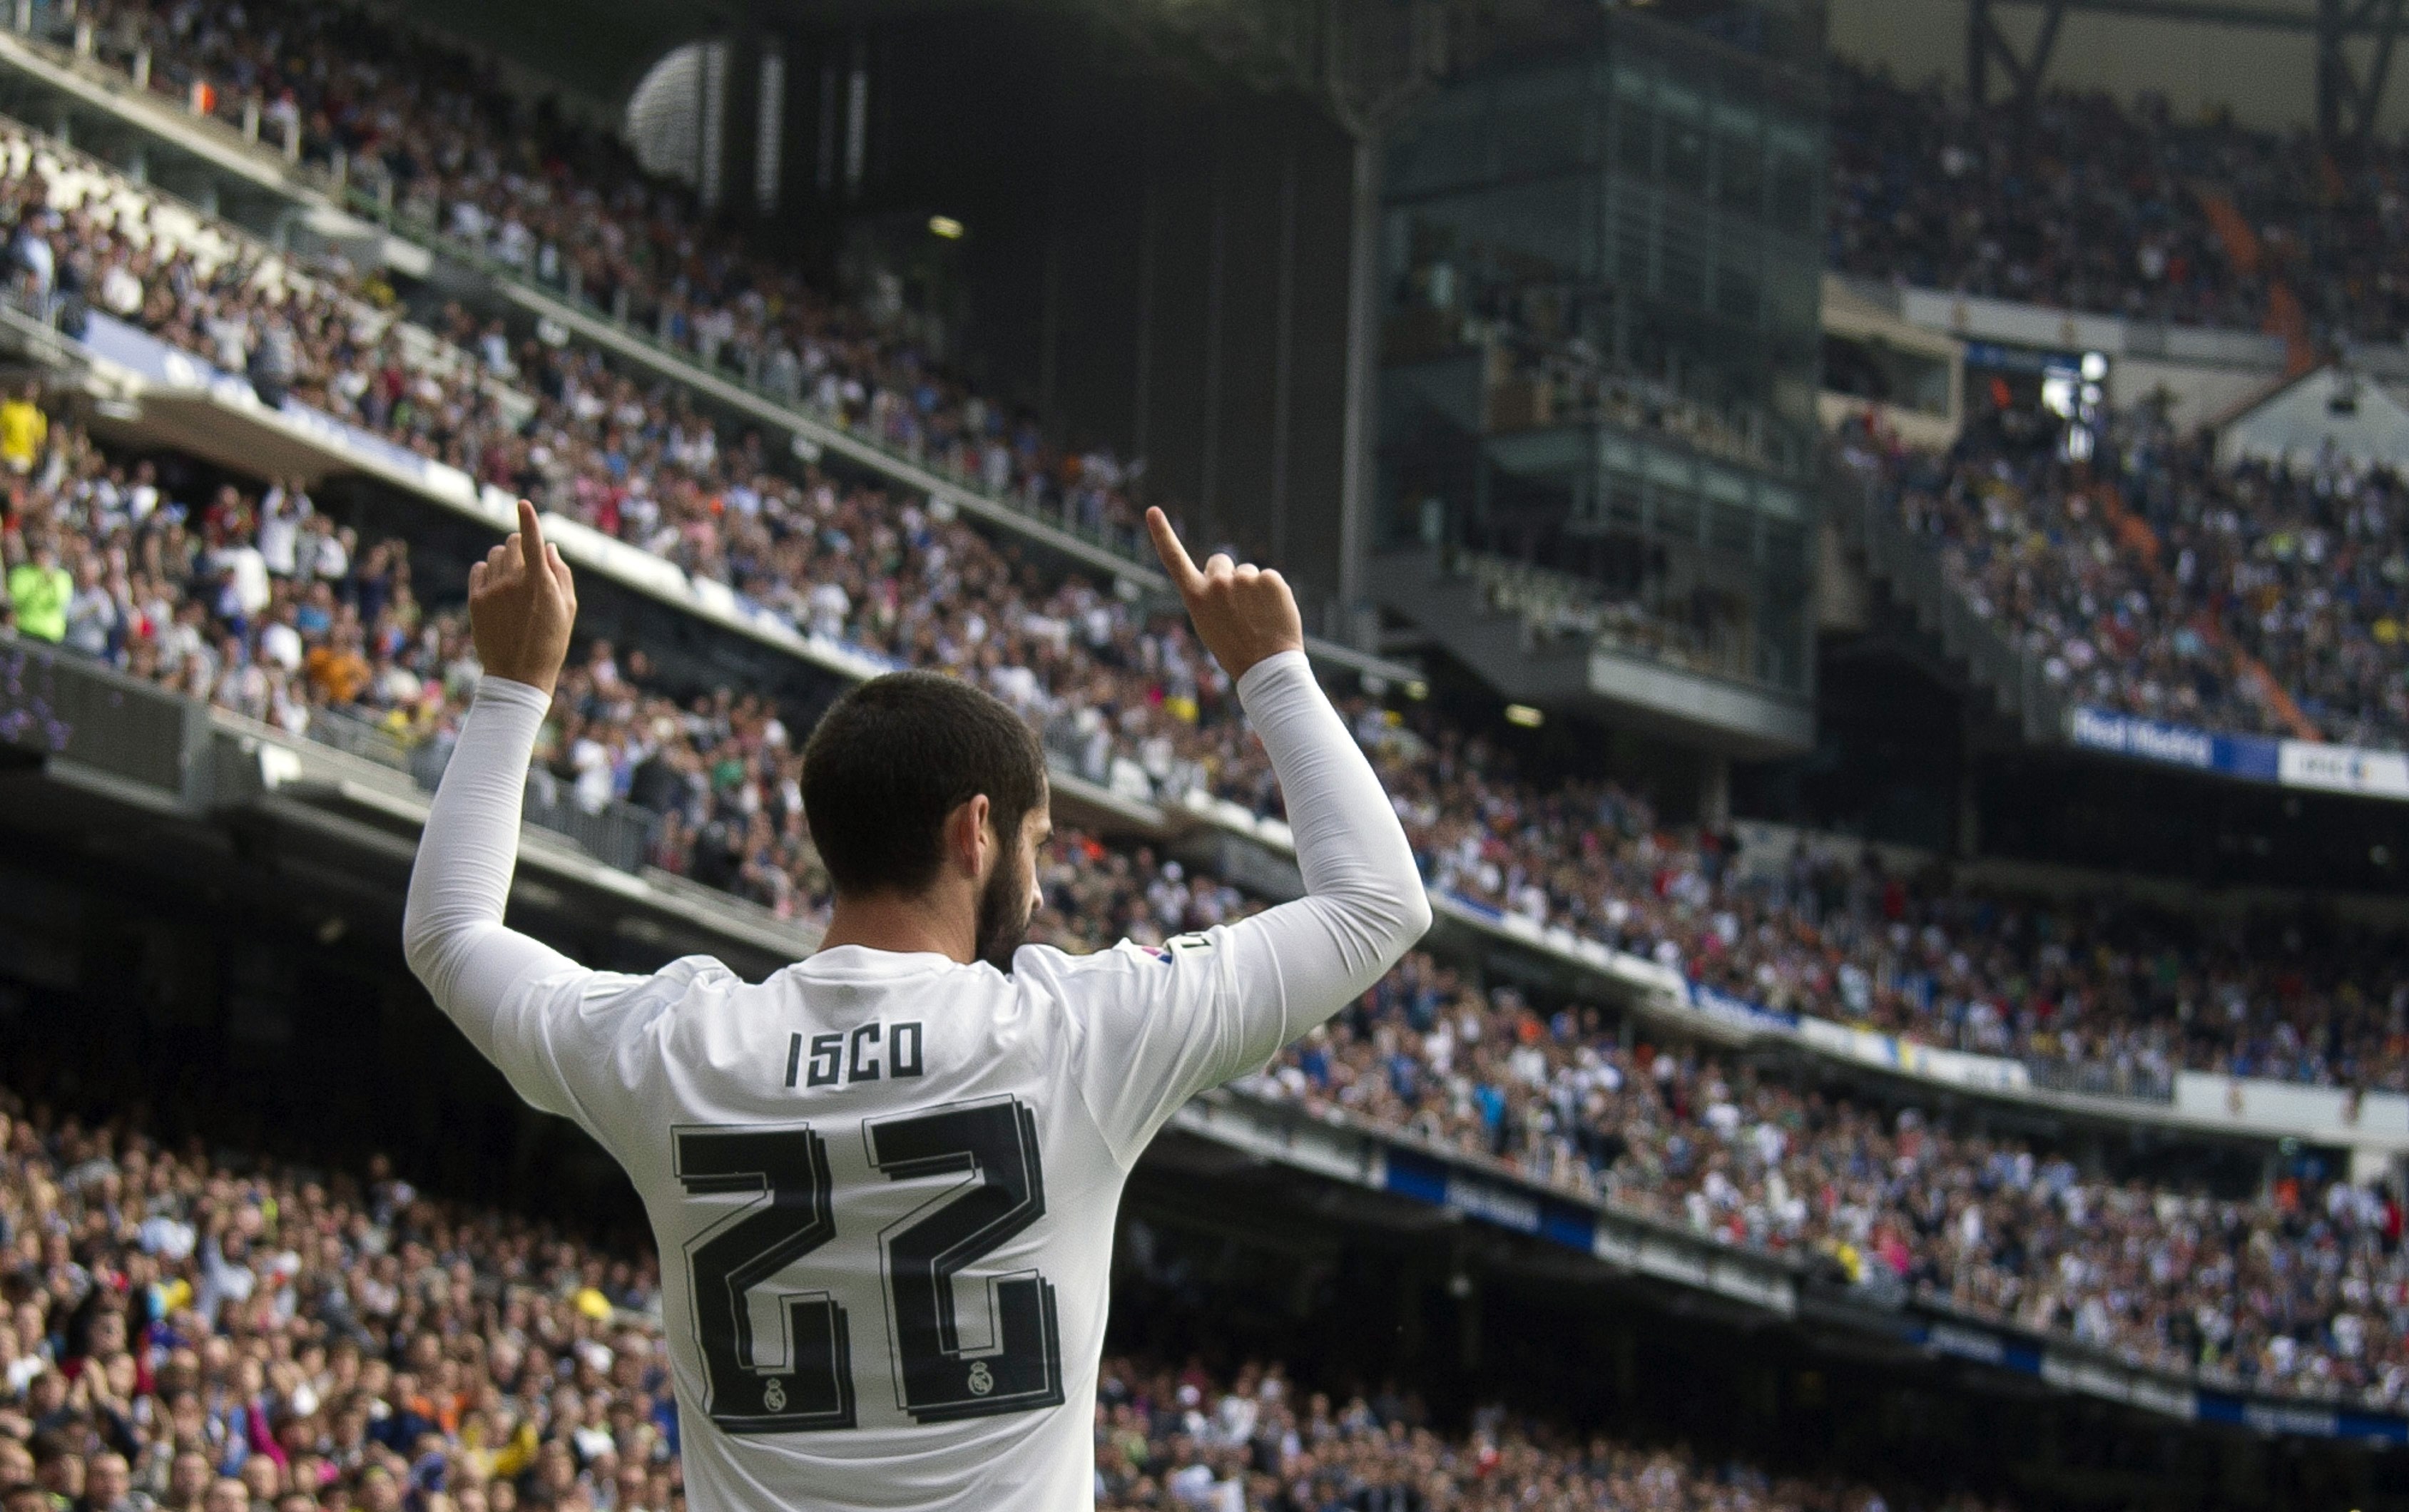 Real Madrid's midfielder Isco celebrates his goal during the Spanish league football match Real Madrid CF vs UD Las Palmas at the Santiago Bernabeu stadium in Madrid on October 31, 2015.(Photo by Curto de la Torre/AFP/Getty Images)